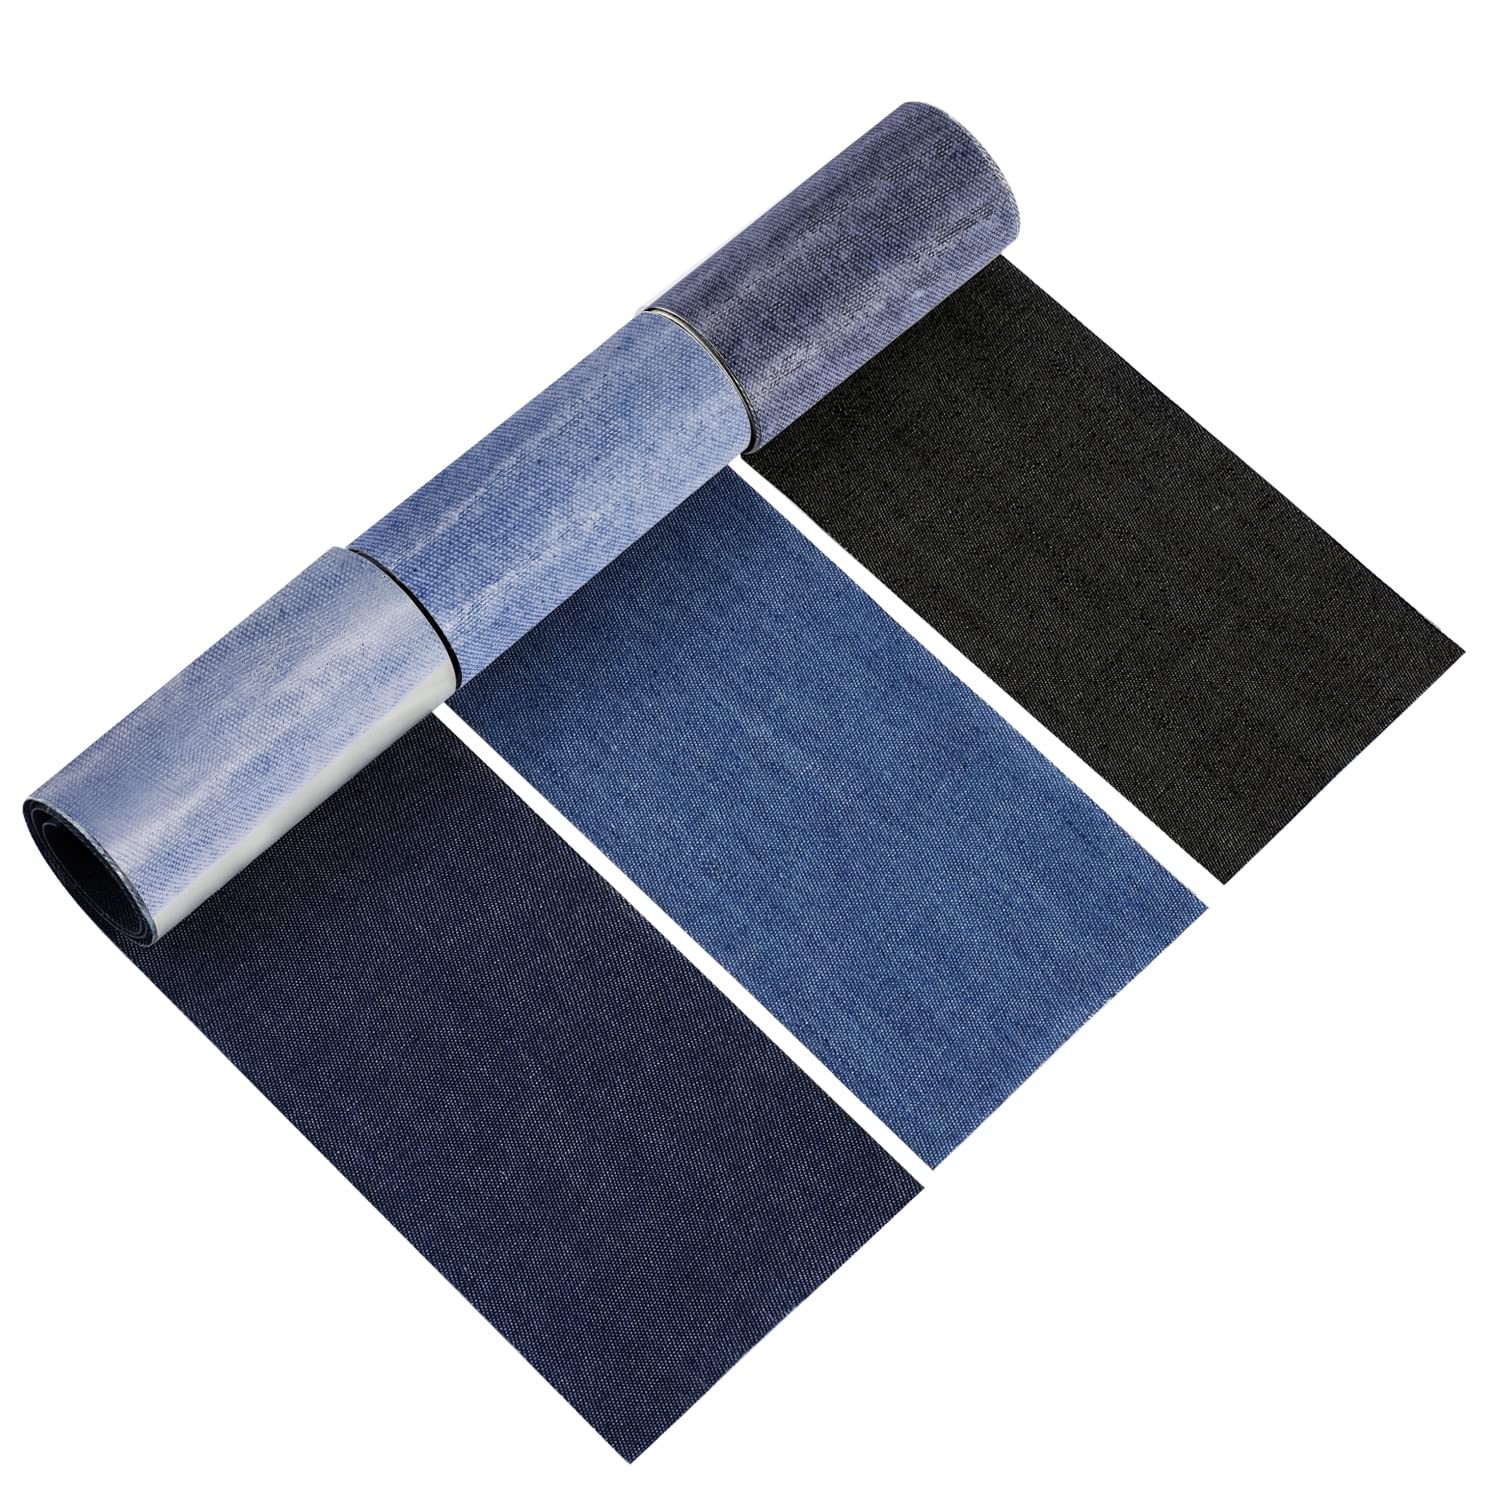 Jeans Denim Patches 3 Rolls , 3 x 20 Inside and Outside Iron On Patches  Jeans Patches for Jeans Clothing Hole Repairing and Decoration (Light Blue,  Dark Blue, Black) 3 x 20 inch Style1